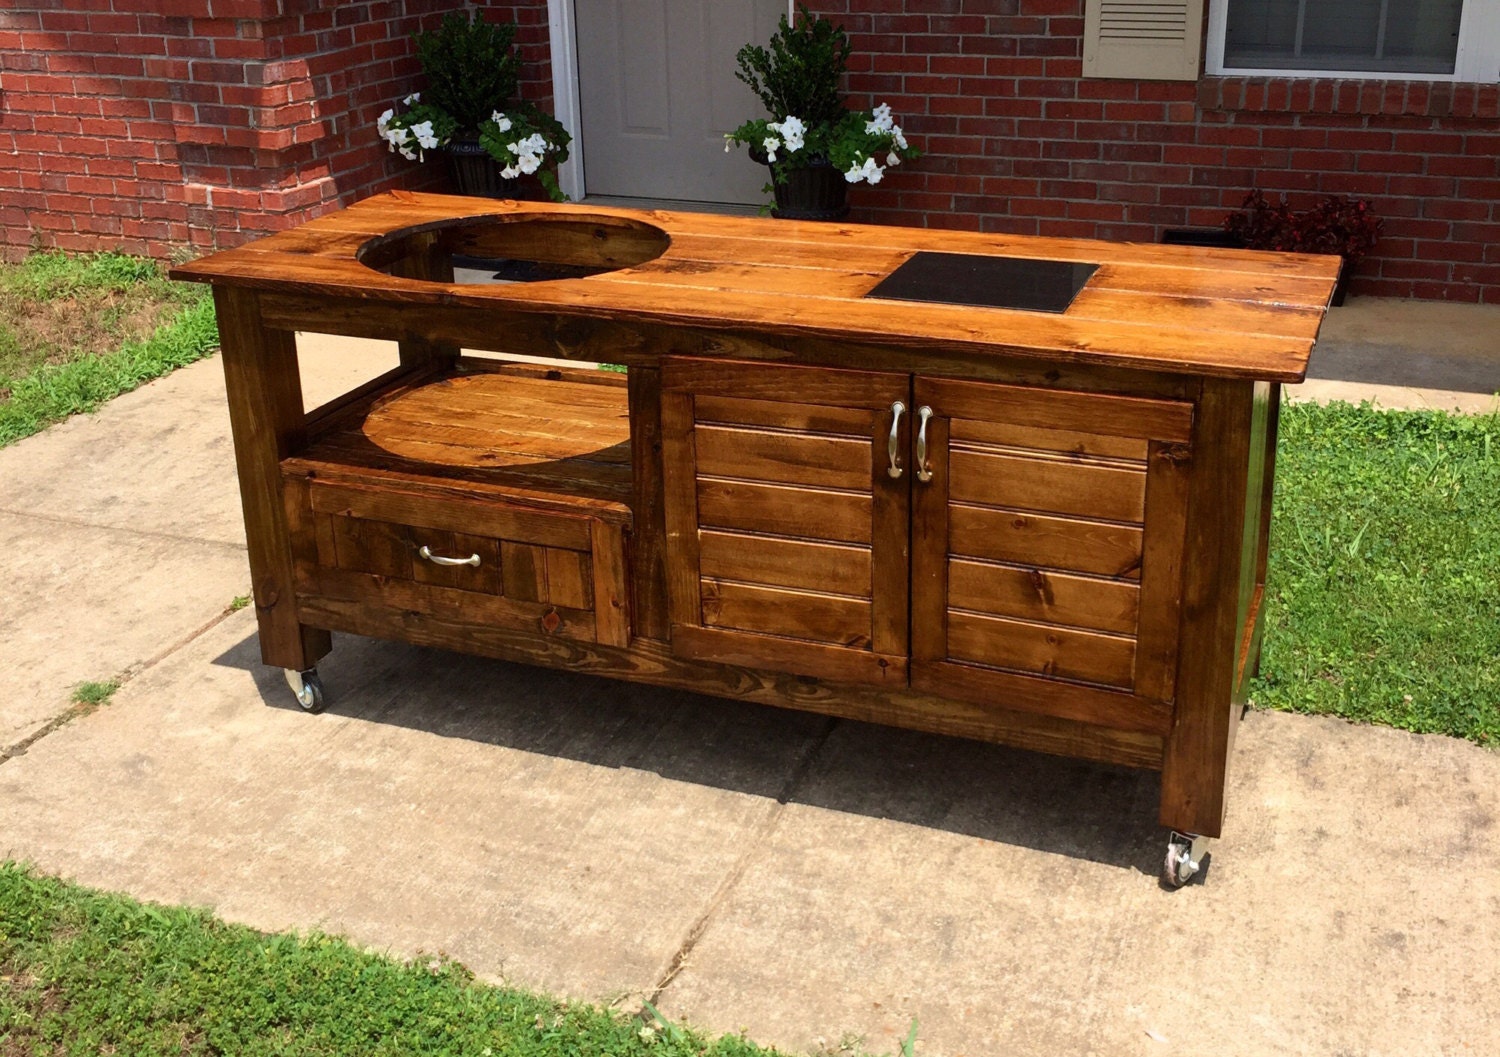 Big Green Egg Table Long Table All sizes by McVeyMadeFurniture